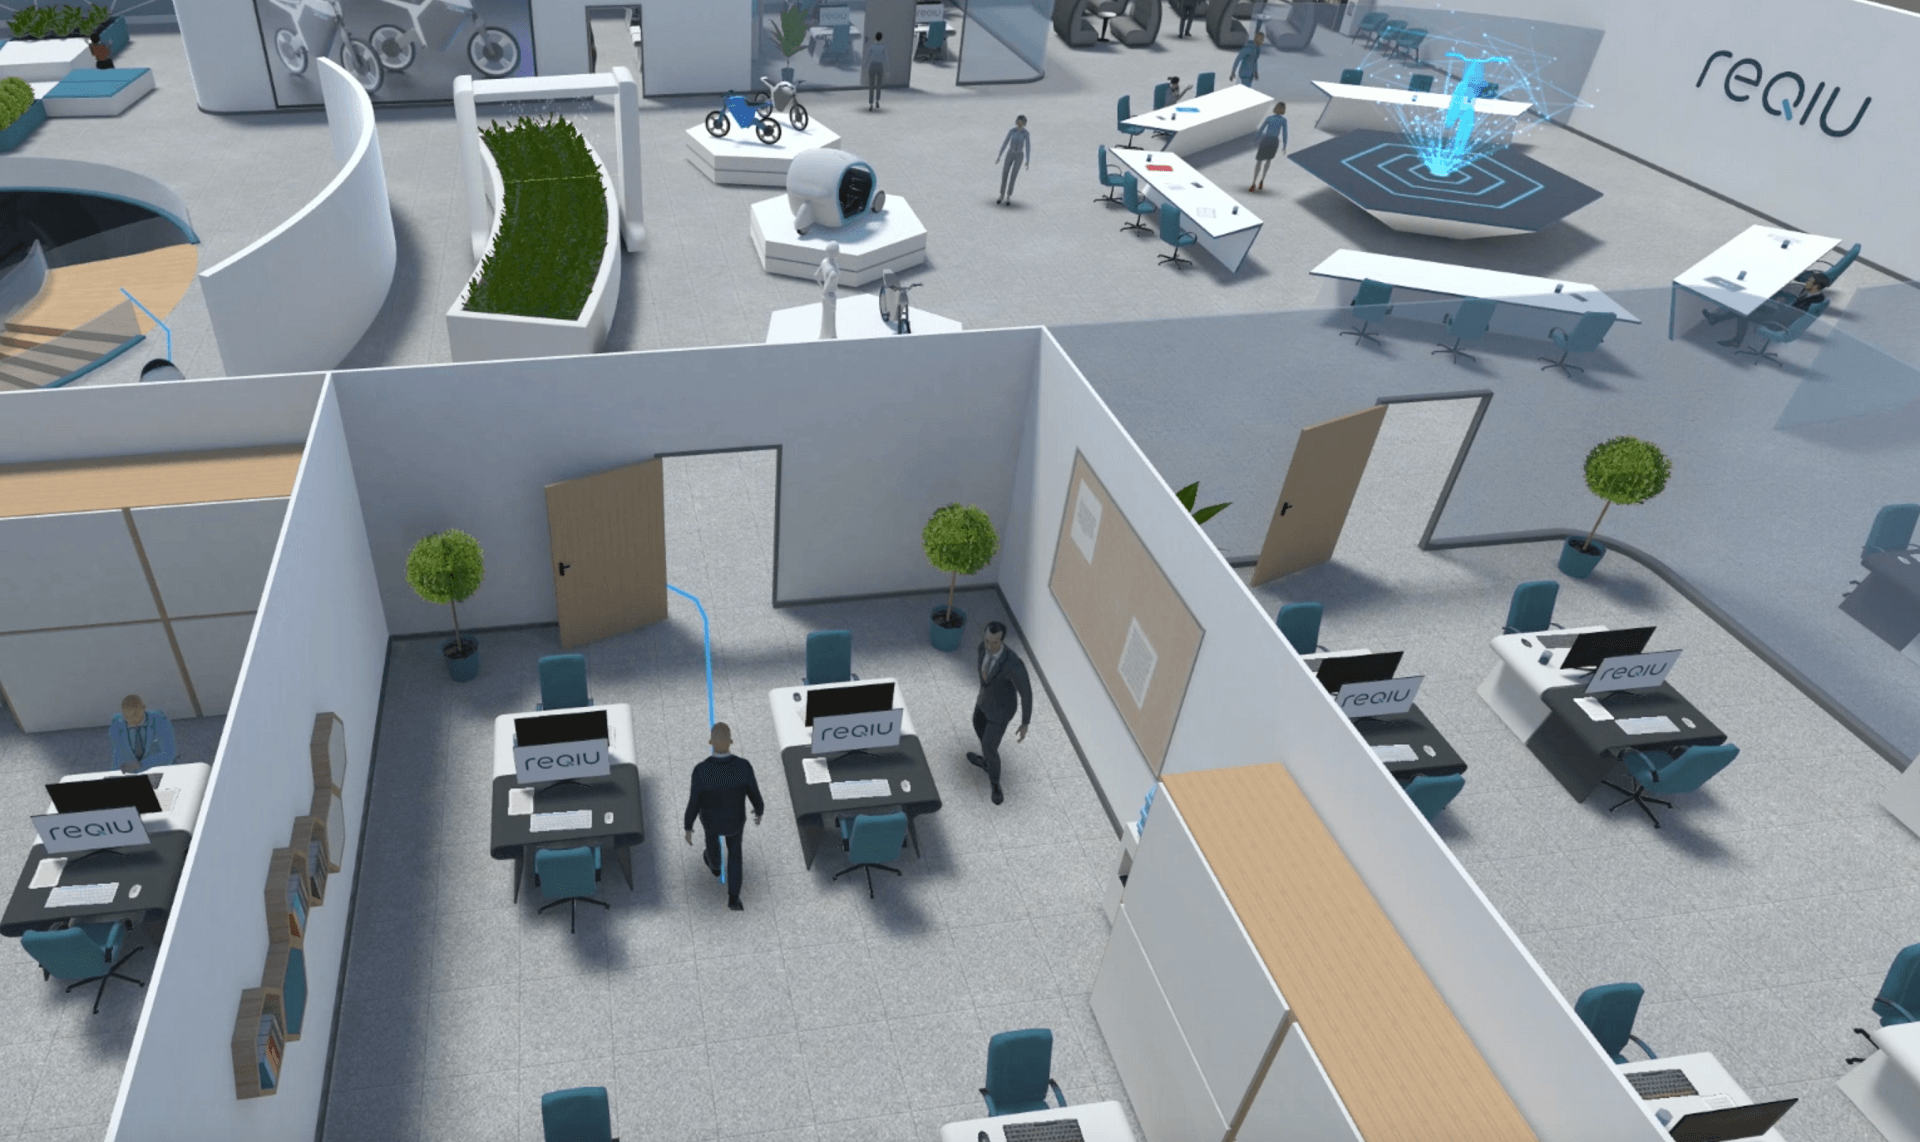 View from the game, animation. Modern office space with moving employees and green areas. In the center is an island with motorbikes, indicating the type of activity of the enterprise. The blue line in front of one of the walking men shows the direction he is going. In the neighboring box, there is a green exclamation mark above the person working at the desk